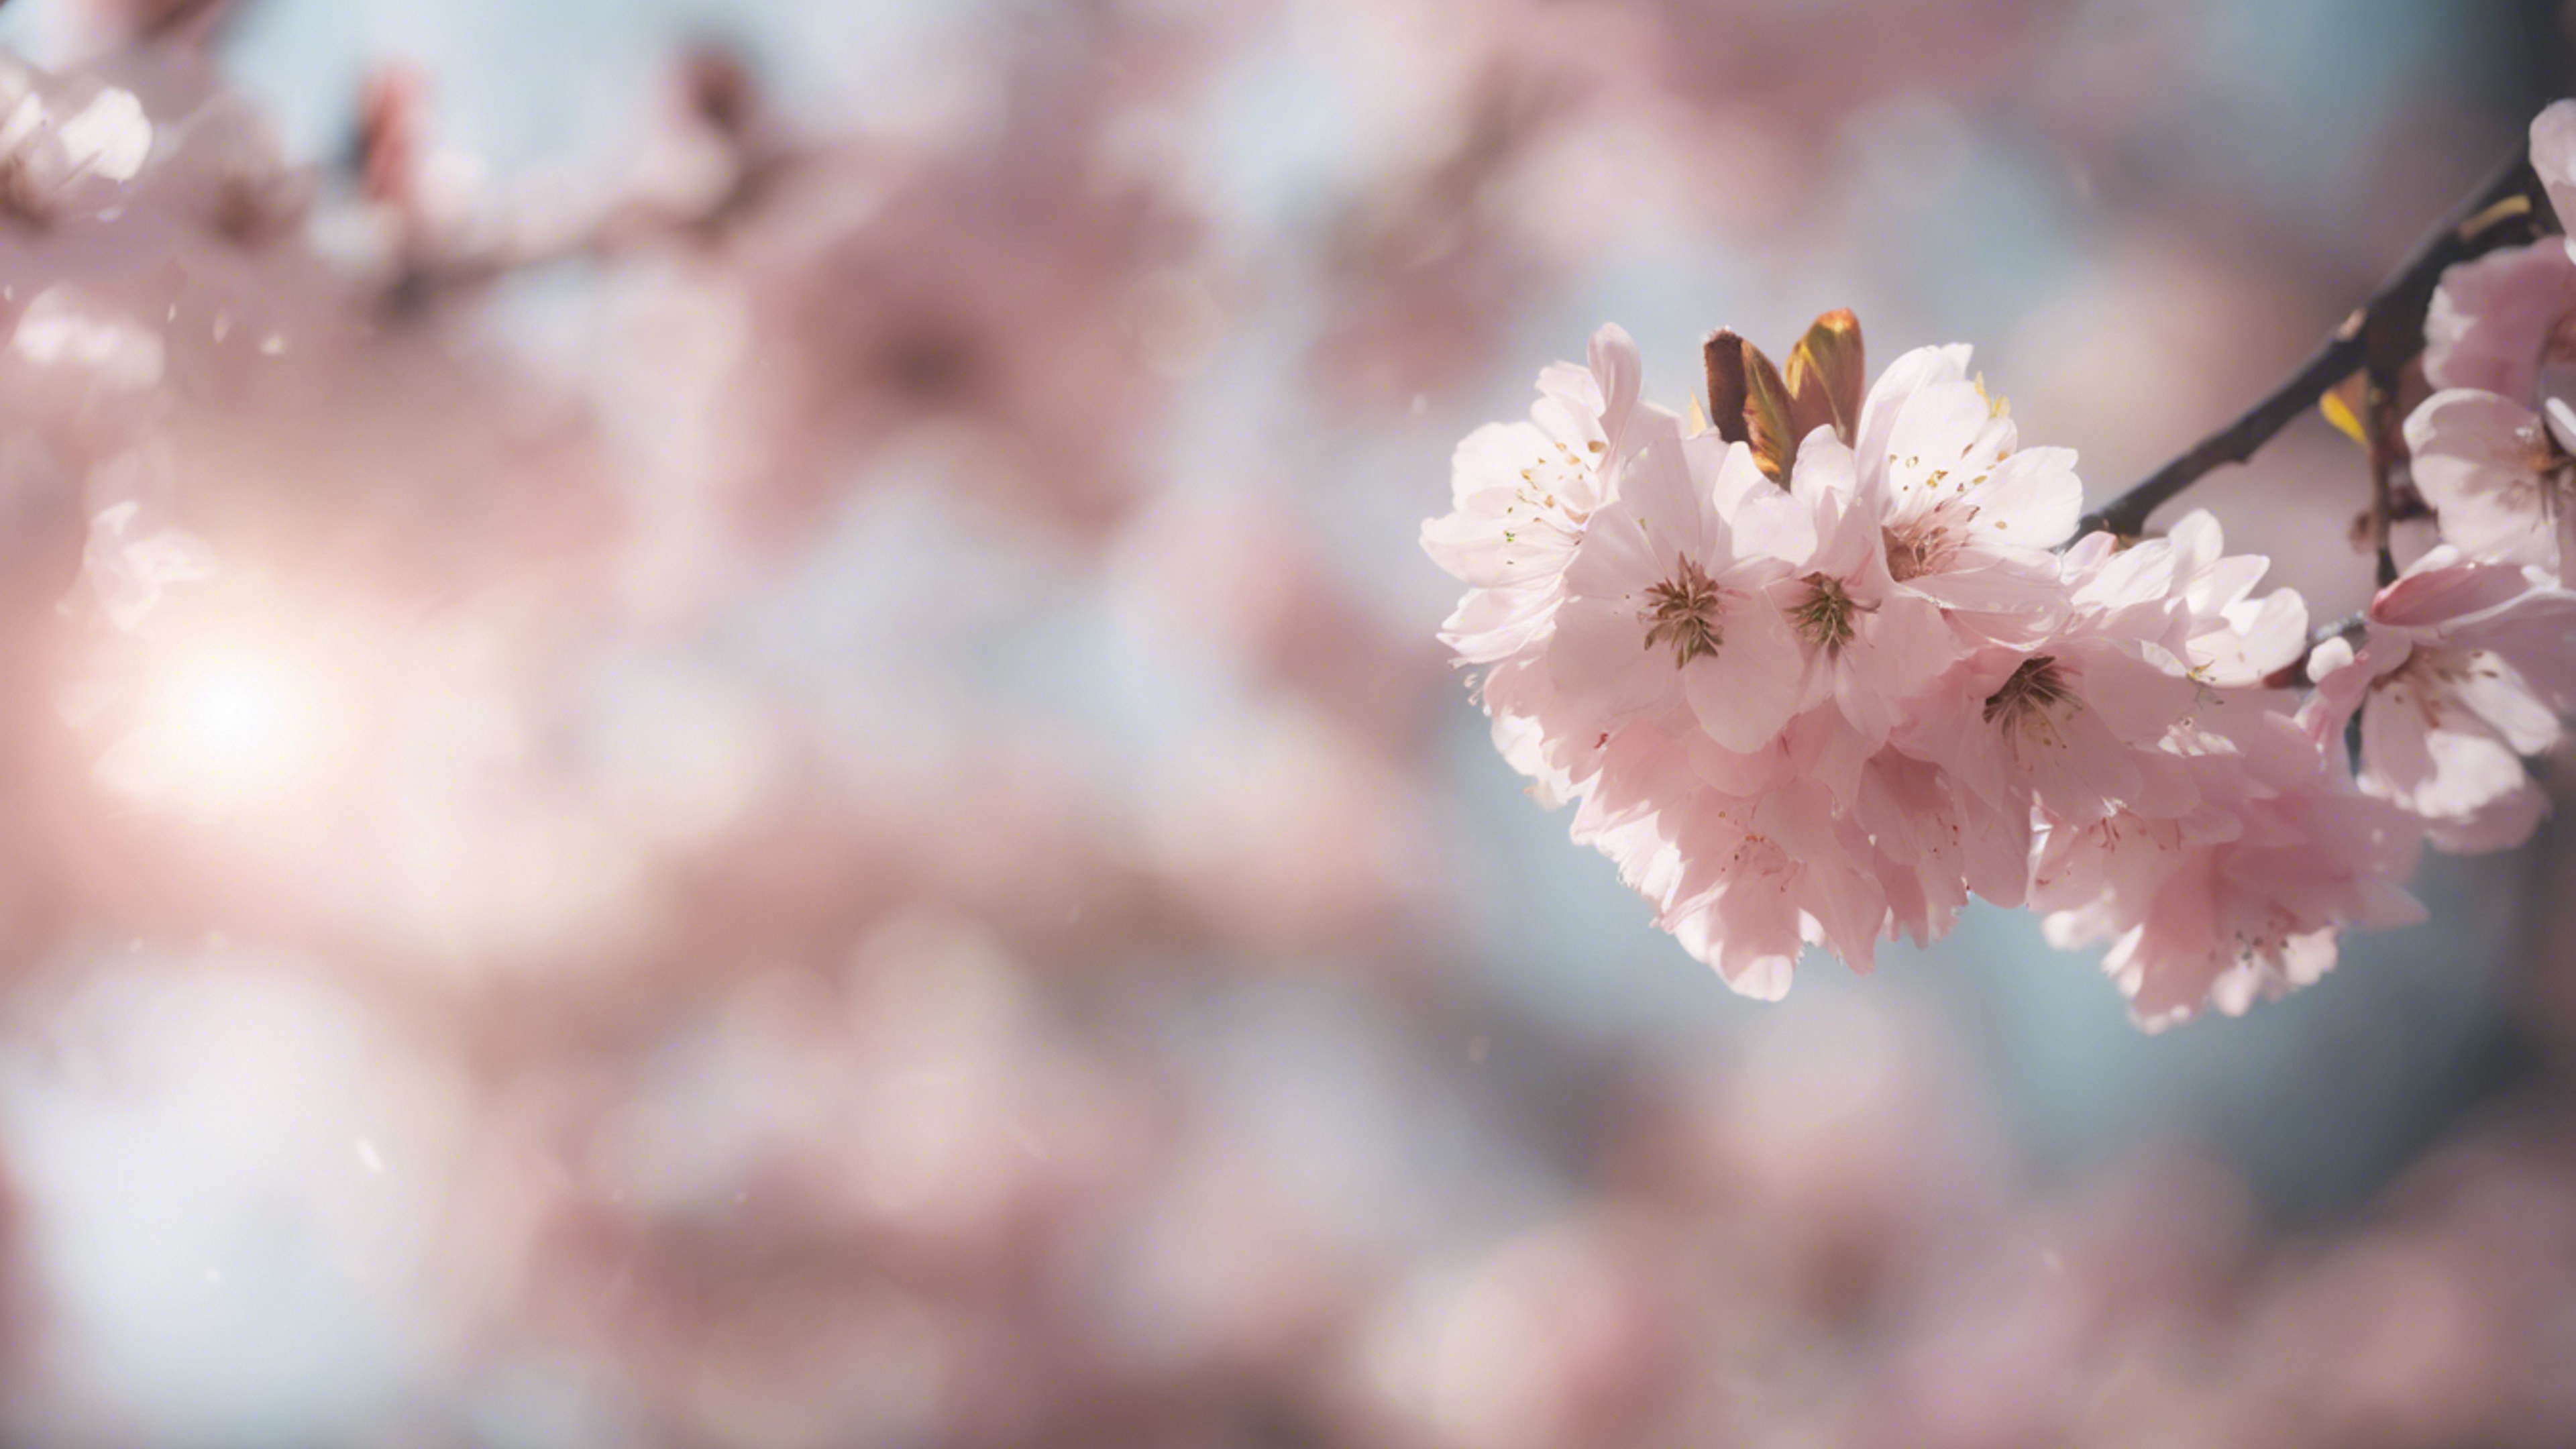 An ethereal dreamscape featuring cherry blossoms wafting in the soft spring breeze. 墙纸[9de2e4f1deeb467ebab6]